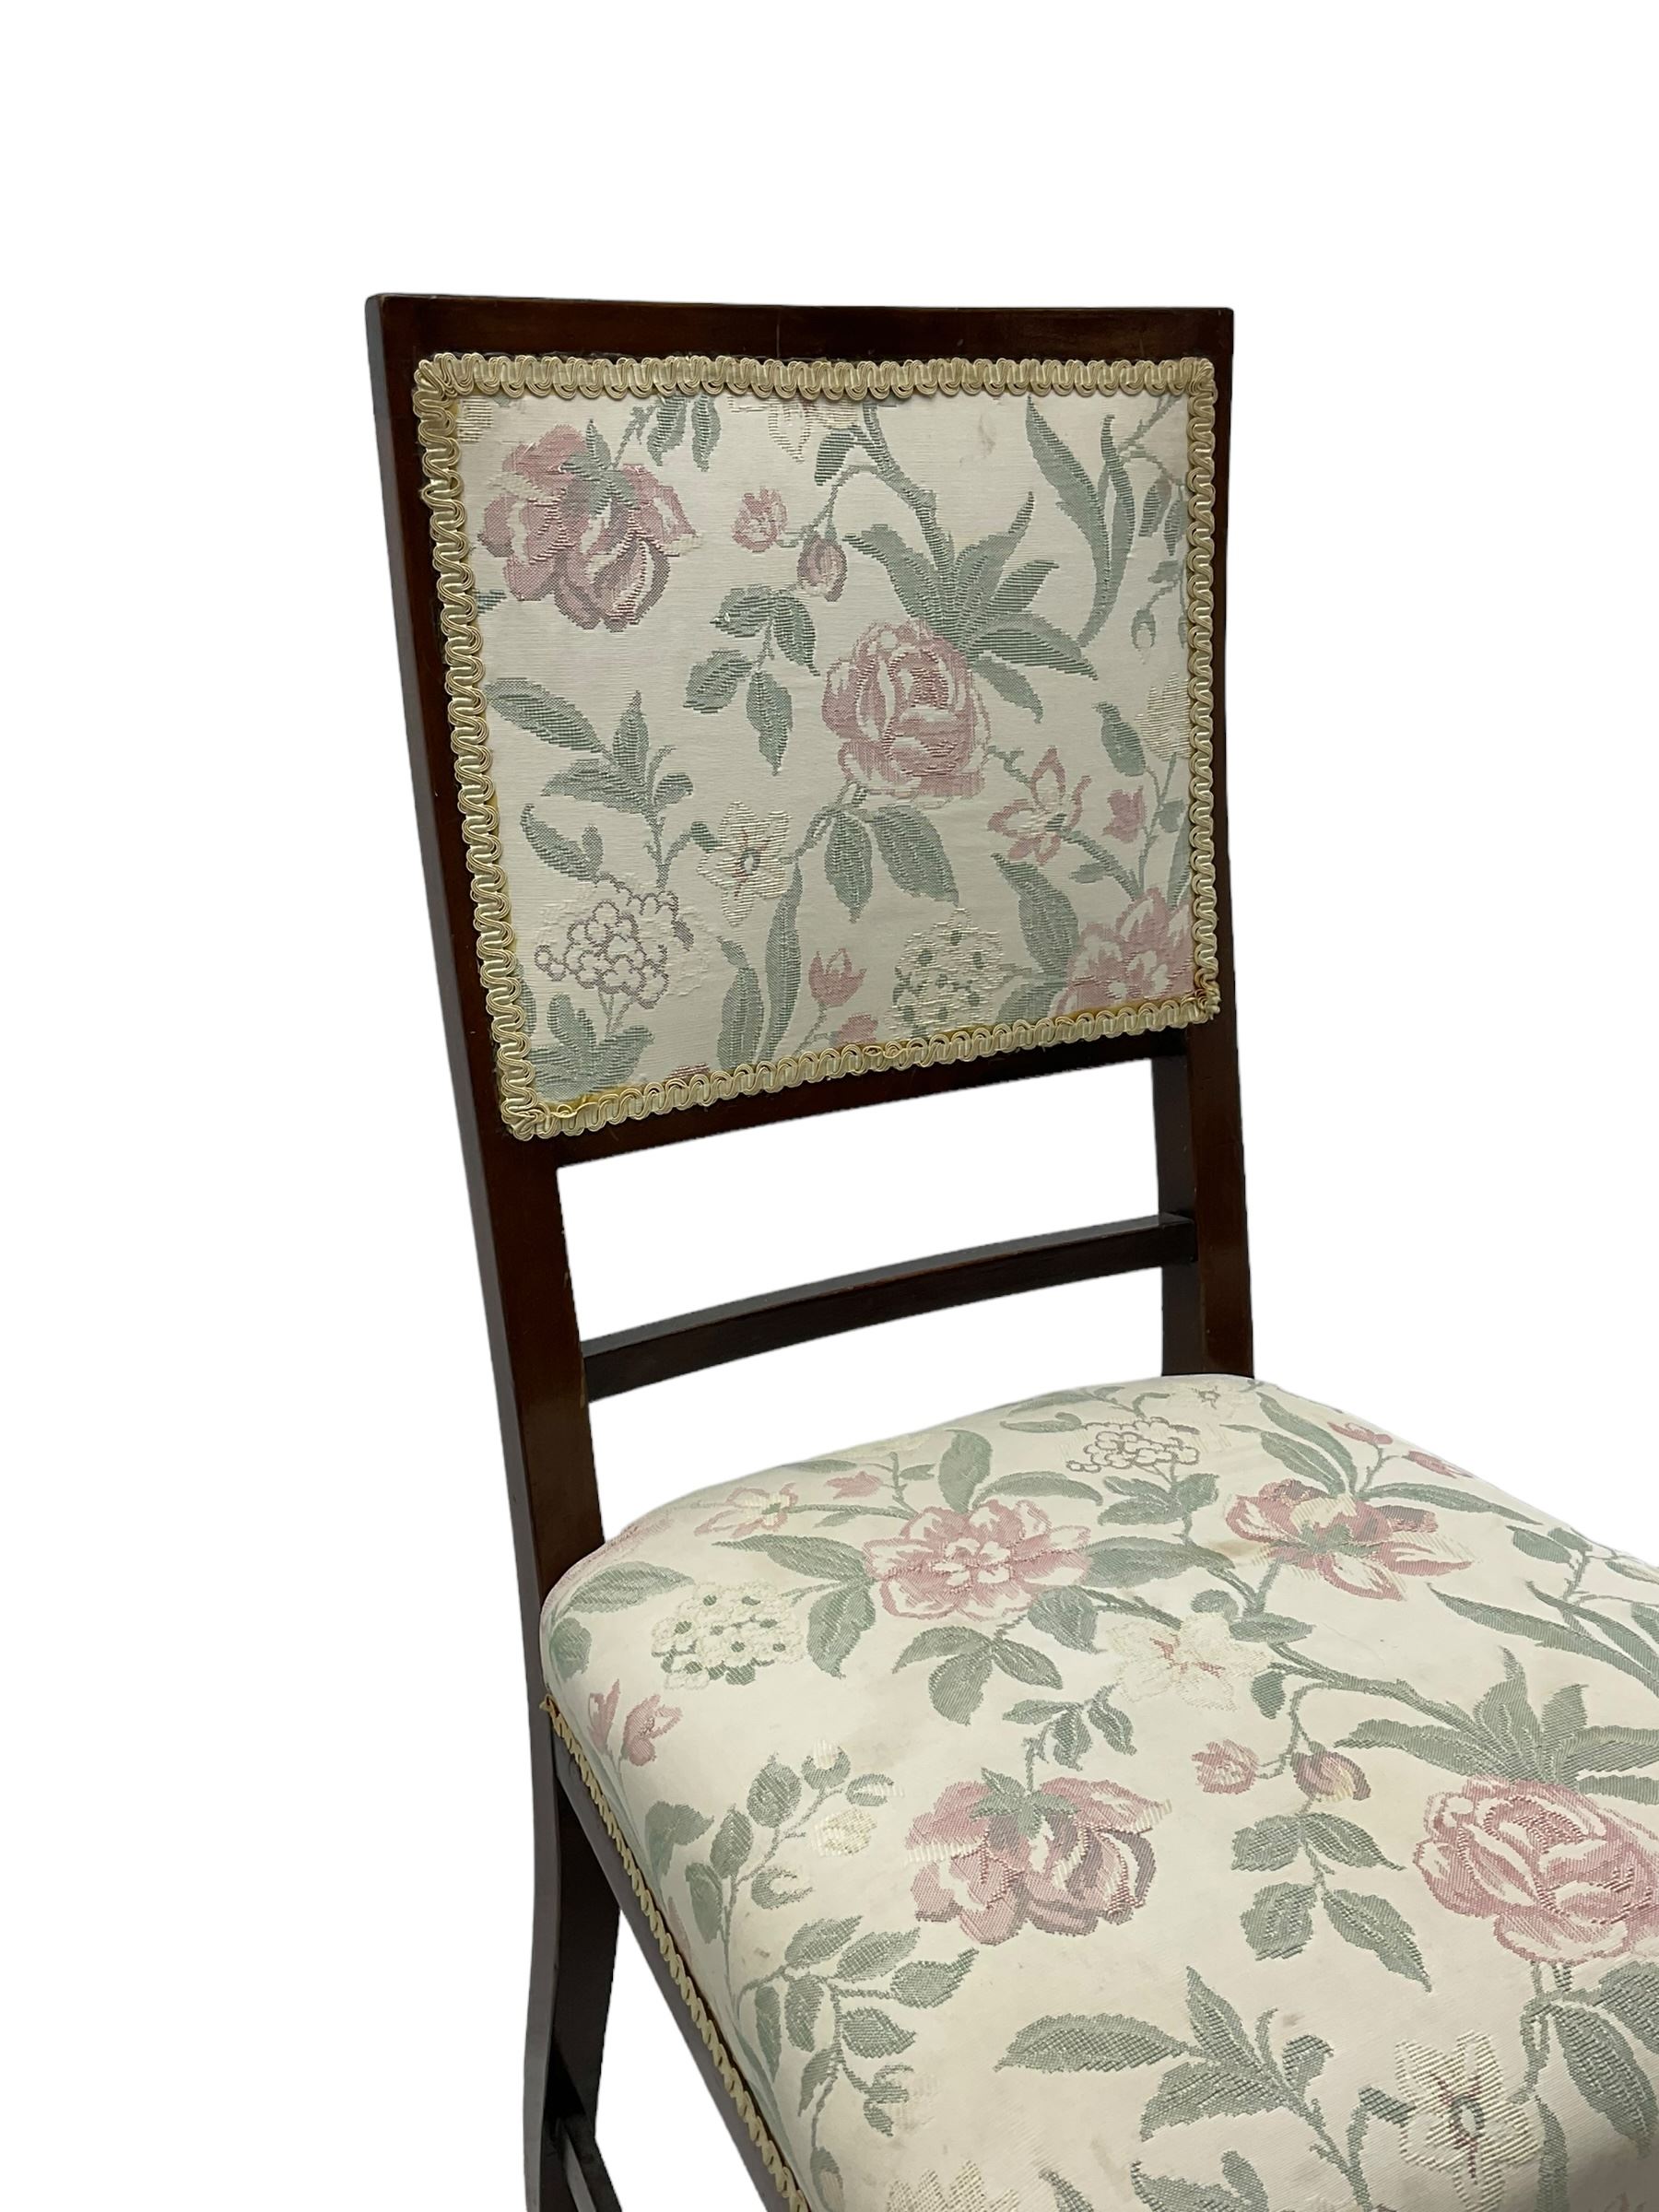 Pair of mahogany framed bedroom chairs upholstered in floral pattern fabric (W45cm); rectangular foo - Image 5 of 5